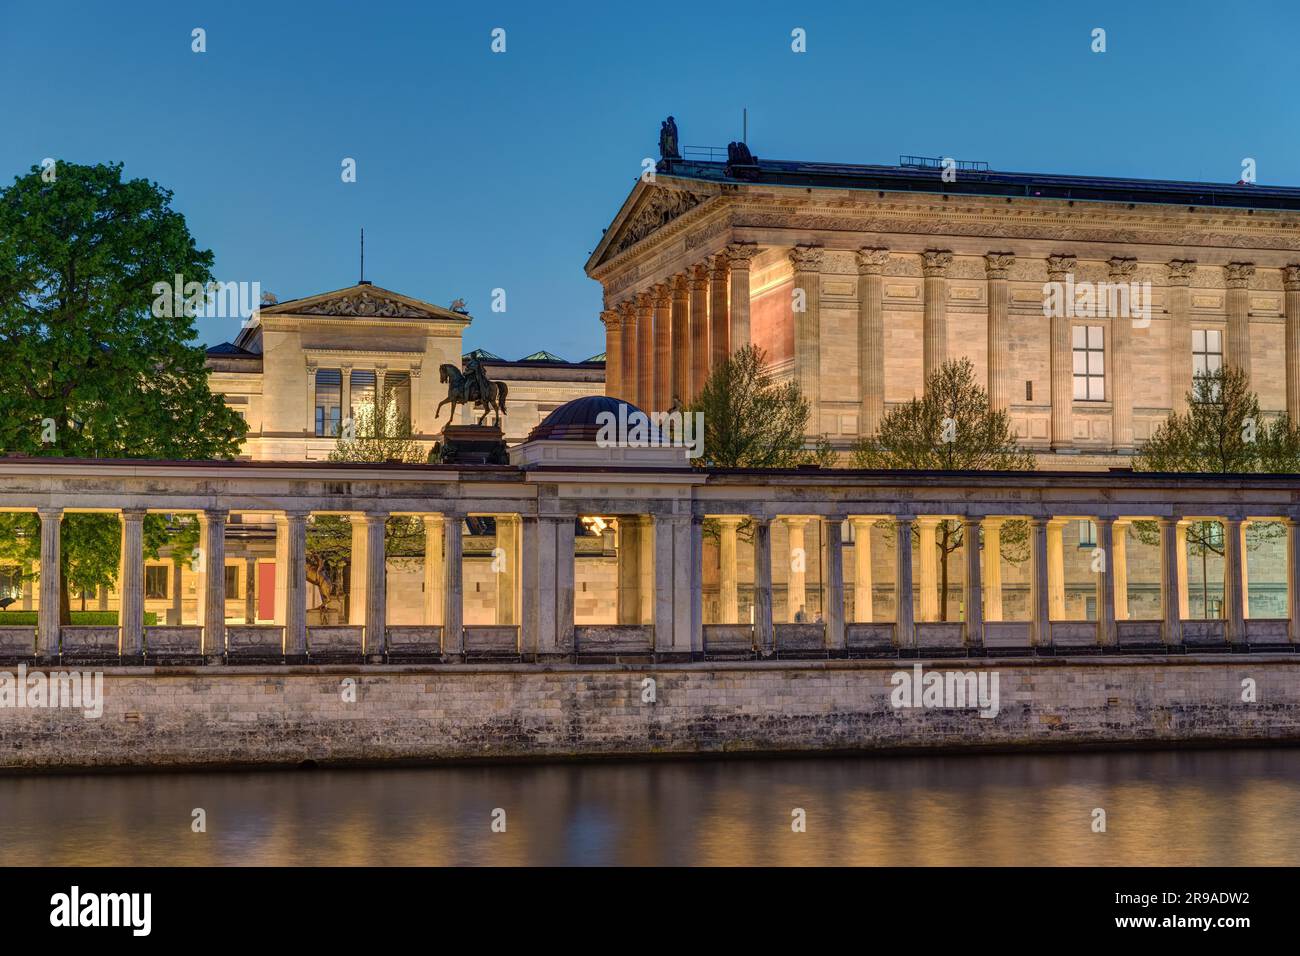 The Old National Gallery in Berlin by night Stock Photo